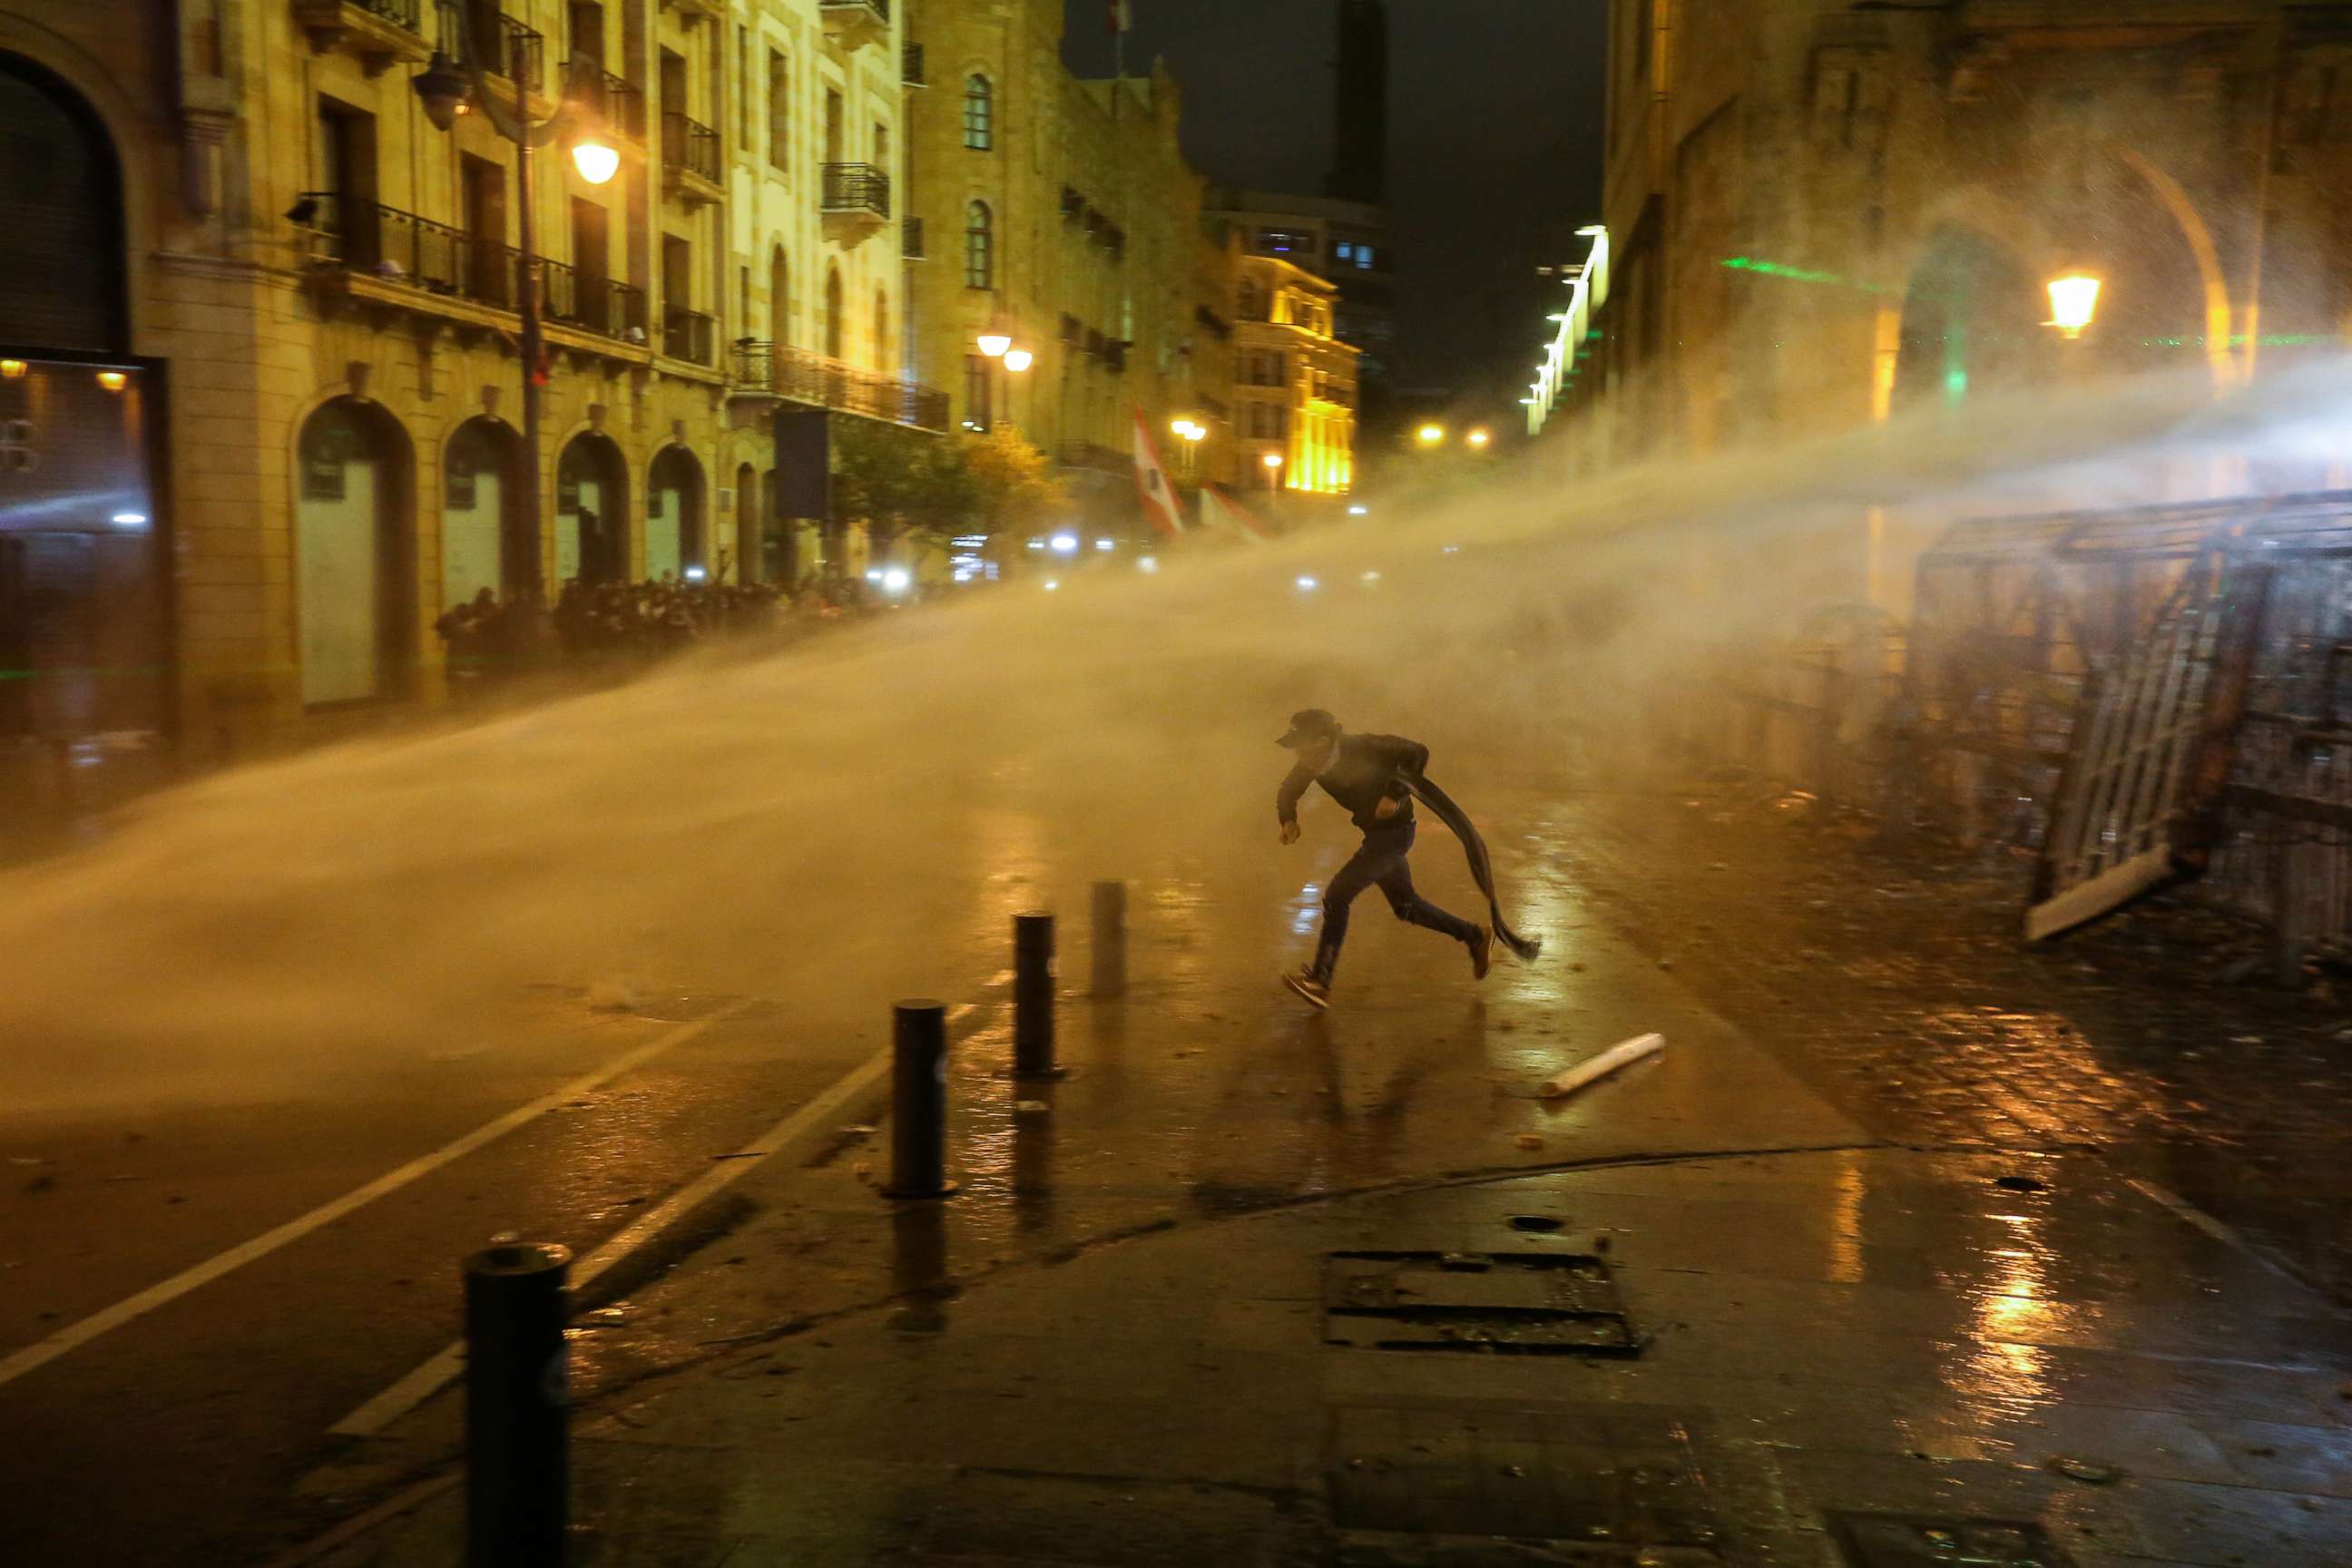 PHOTO: A demonstrator is hit by a water cannon during a protest against a ruling elite accused of steering Lebanon towards economic crisis in Beirut, Jan. 19, 2020.